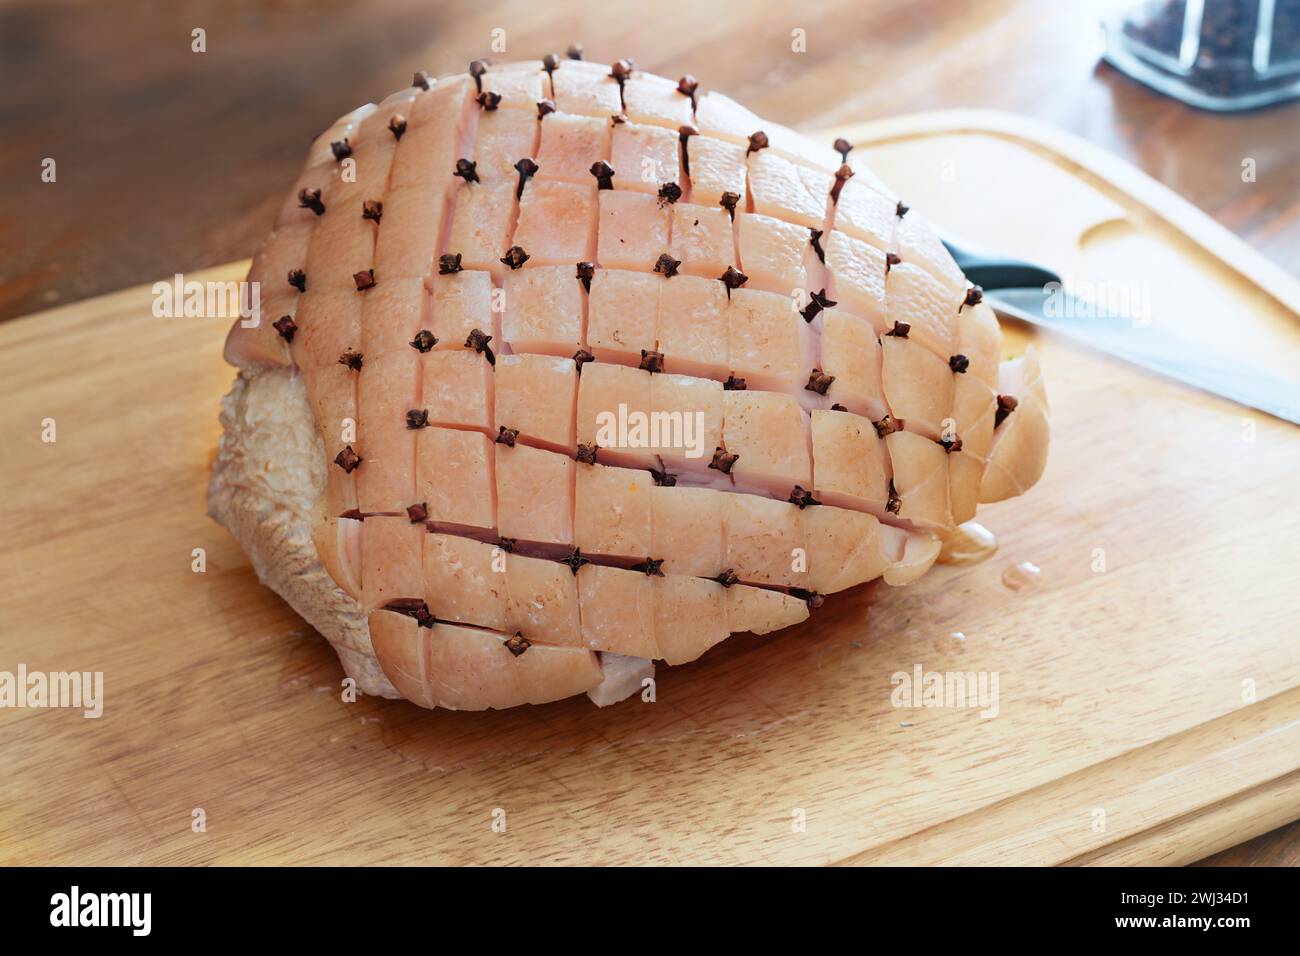 Rind of a raw roast pork cut in diamond shape and larded with cloves on a wooden kitchen board, cooking preparation for a Christ Stock Photo